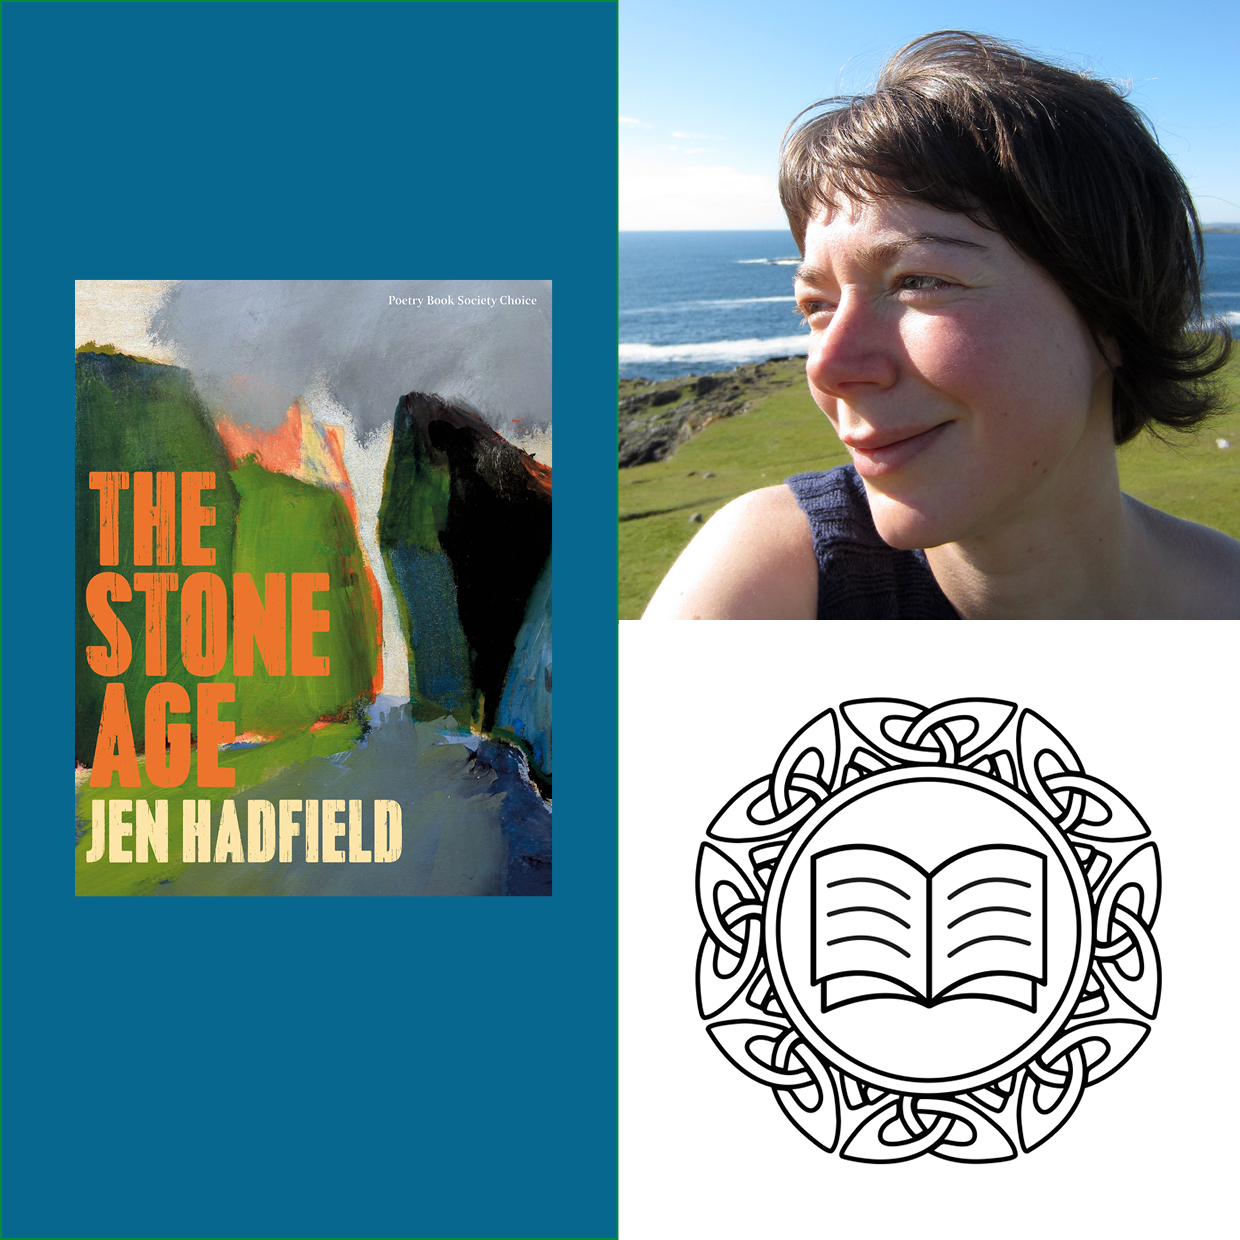 2021 HIGHLAND BOOK PRIZE LONGLIST SERIES: POETRY MORNING WITH JEN HADFIELD